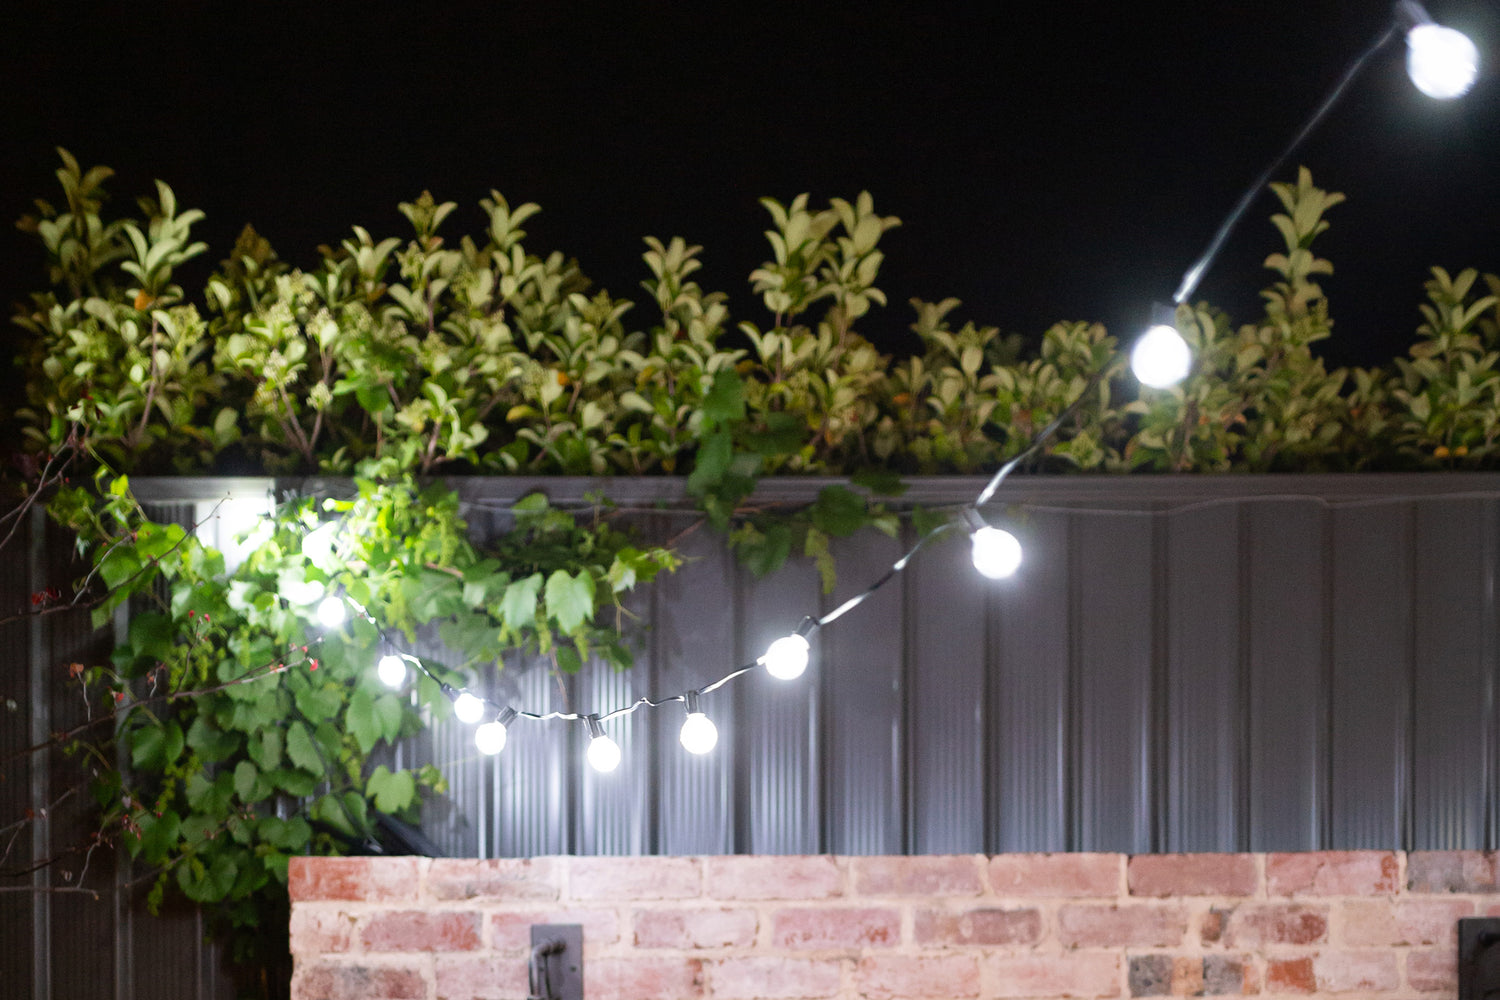 Cool white solar festoon lights hung around barbecue area